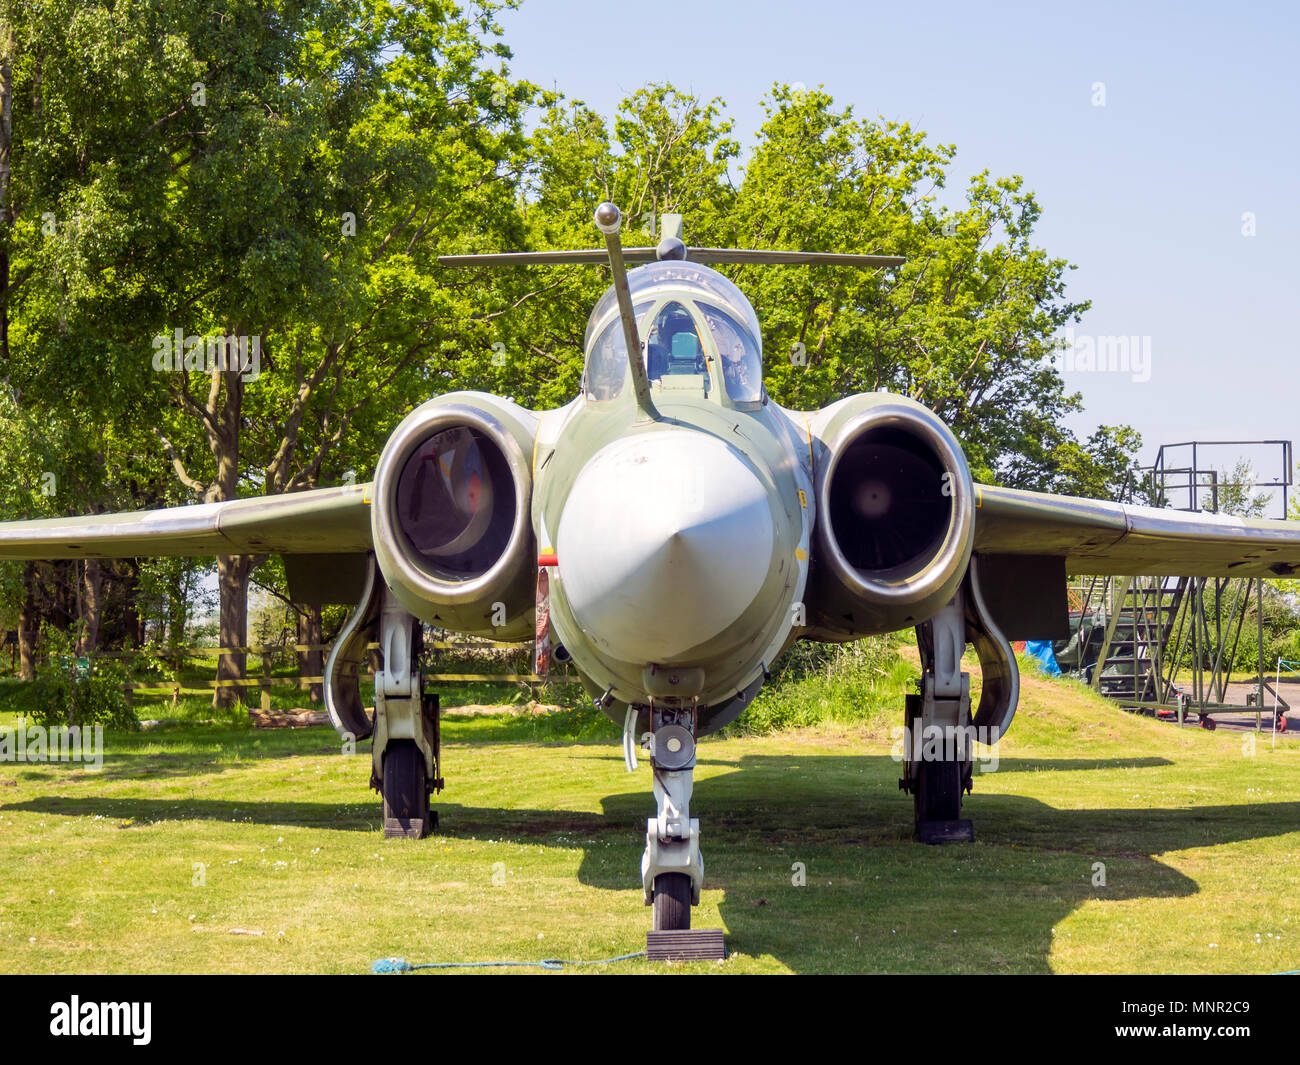 Blackburn Buccaneer carrier-borne attack aircraft that  entered service in 1962 on display at the Yorkshire Air Museum Elvington York UK Stock Photo